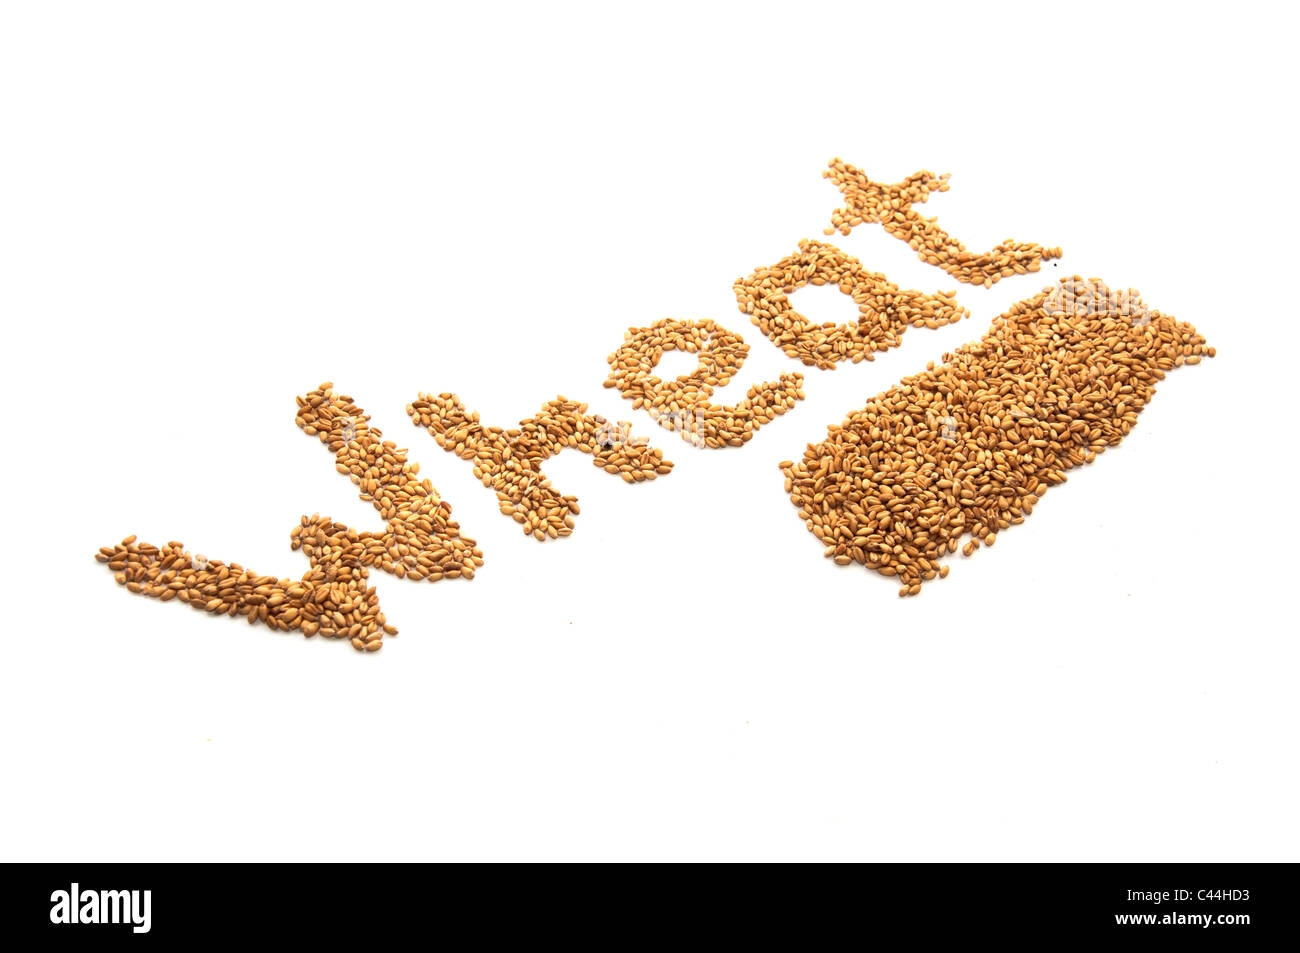 Wheat grains over a white background Stock Photo